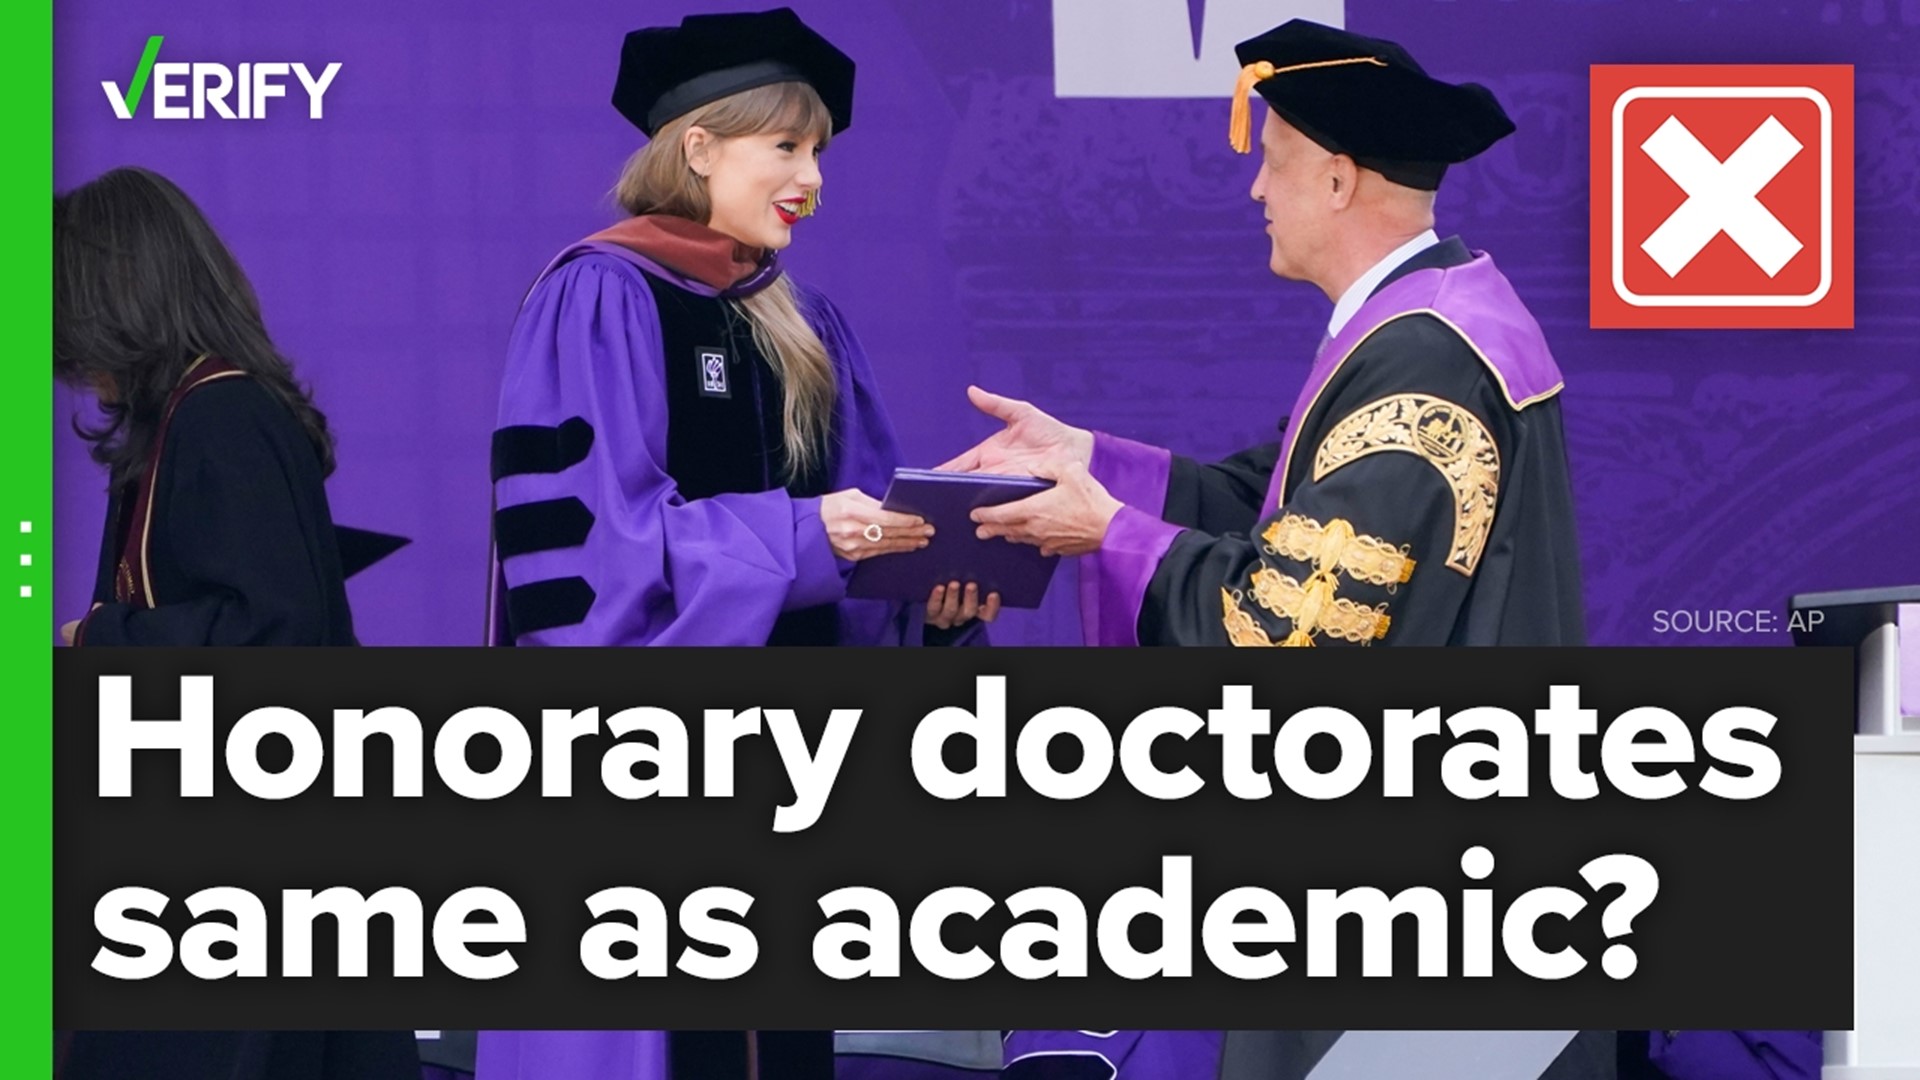 While celebrities and other prominent people might receive an honorary doctorate from a university, the degrees have no academic merit.